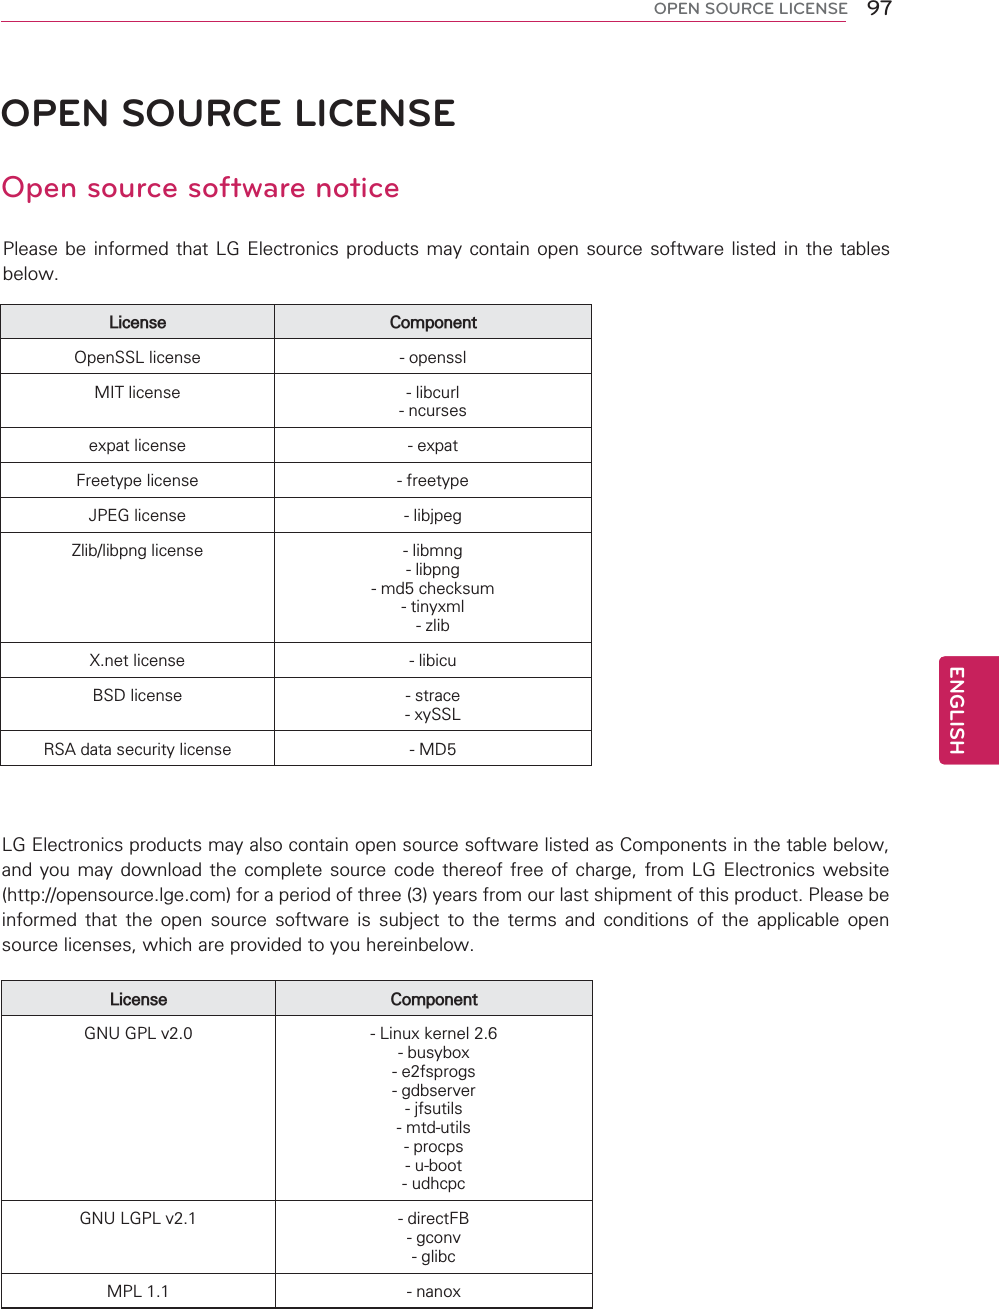 97ENGENGLISHOPEN SOURCE LICENSEOPEN SOURCE LICENSEOpen source software noticePlease be informed that LG Electronics products may contain open source software listed in the tables below.License ComponentOpenSSL license - opensslMIT license - libcurl- ncurses expat license - expatFreetype license - freetypeJPEG license - libjpegZlib/libpng license - libmng- libpng- md5 checksum- tinyxml- zlibX.net license - libicuBSD license - strace- xySSLRSA data security license - MD5LG Electronics products may also contain open source software listed as Components in the table below, and you may download the complete source code thereof free of charge, from LG Electronics website (http://opensource.lge.com) for a period of three (3) years from our last shipment of this product. Please be informed that the open source software is subject to the terms and conditions of the applicable open source licenses, which are provided to you hereinbelow.License ComponentGNU GPL v2.0 - Linux kernel 2.6- busybox- e2fsprogs- gdbserver- jfsutils- mtd-utils- procps - u-boot- udhcpcGNU LGPL v2.1 - directFB- gconv- glibc MPL 1.1 - nanox